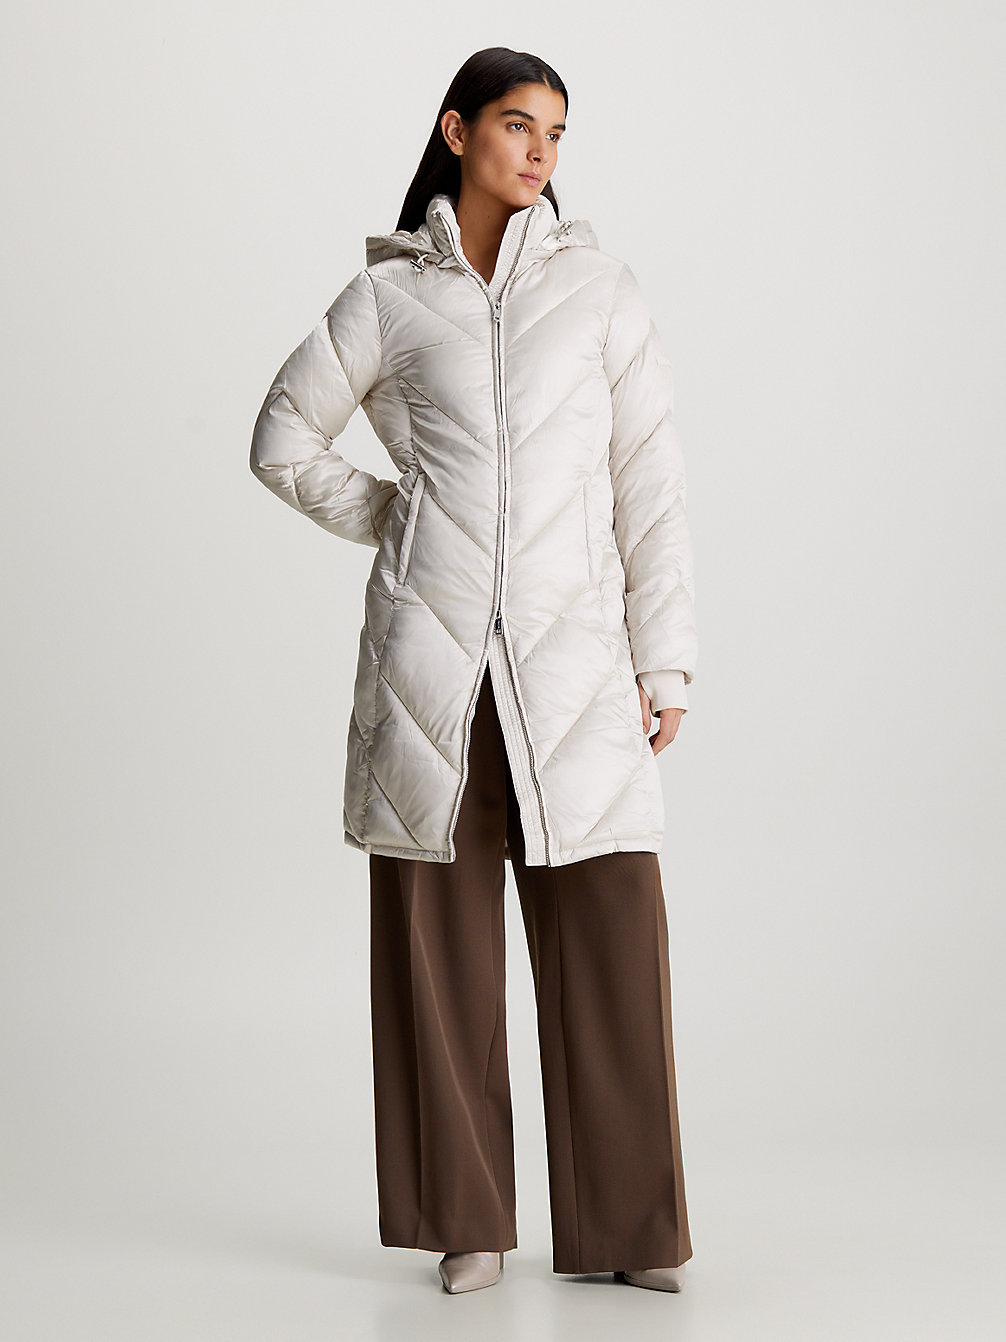 RAINY DAY Padded Pearlescent Coat undefined Women Calvin Klein